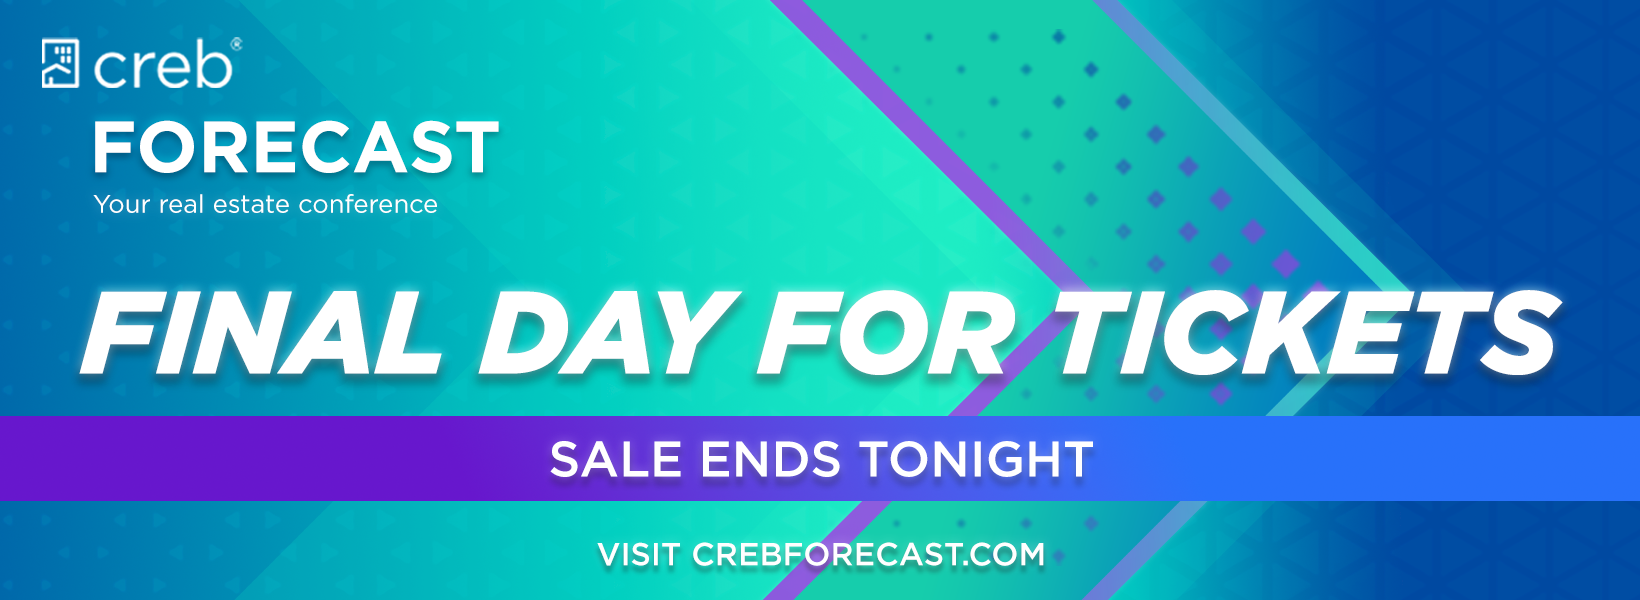 Forecast ticket sale ends